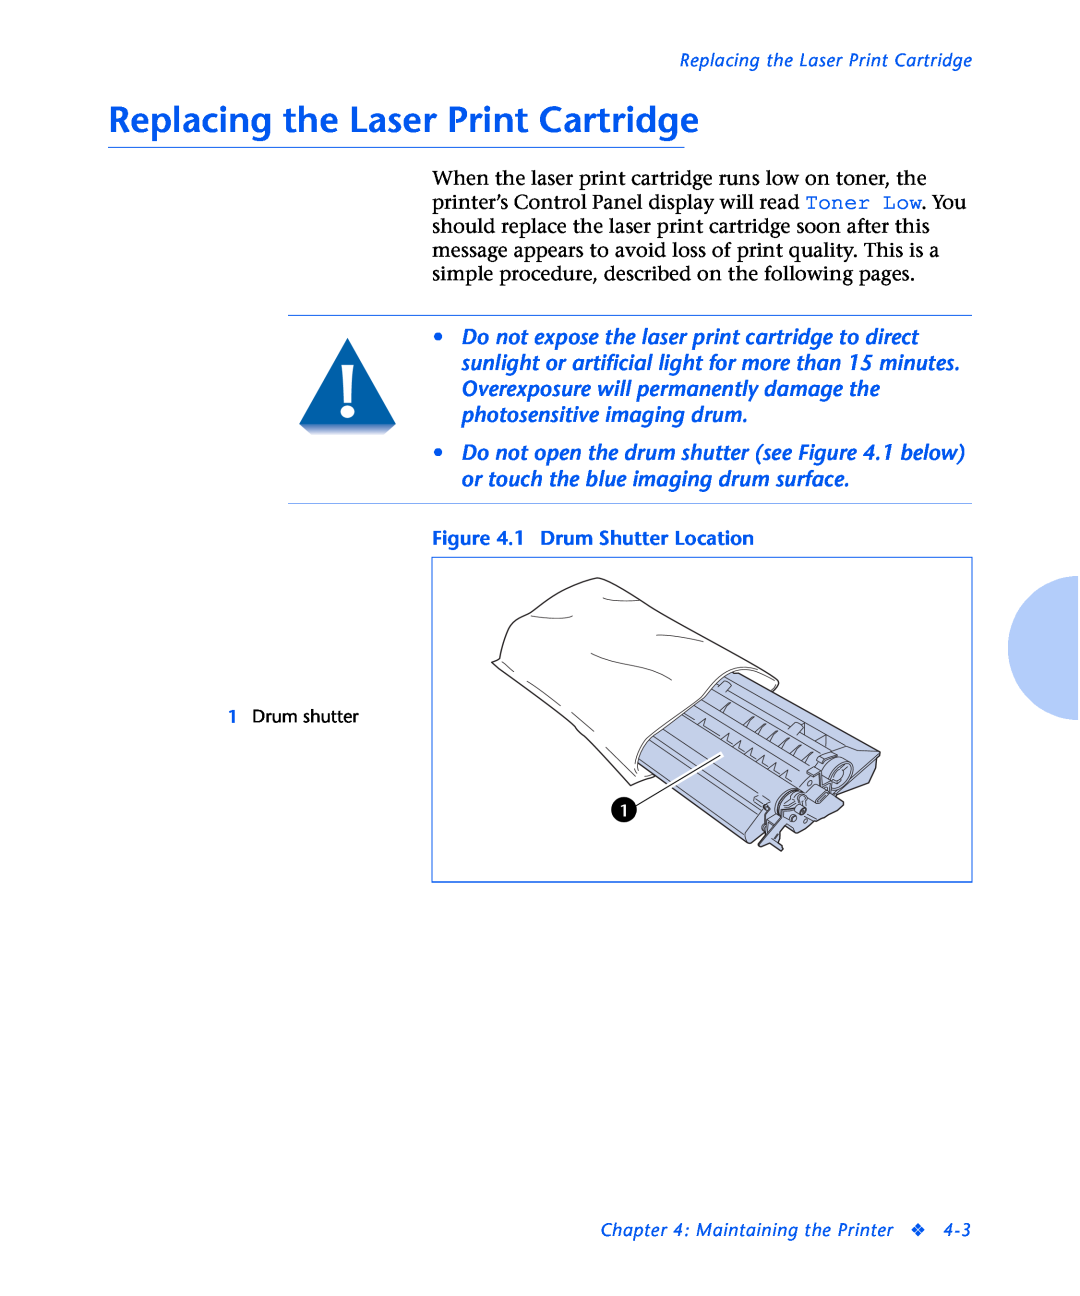 Xerox N2125 Replacing the Laser Print Cartridge, Overexposure will permanently damage the photosensitive imaging drum 